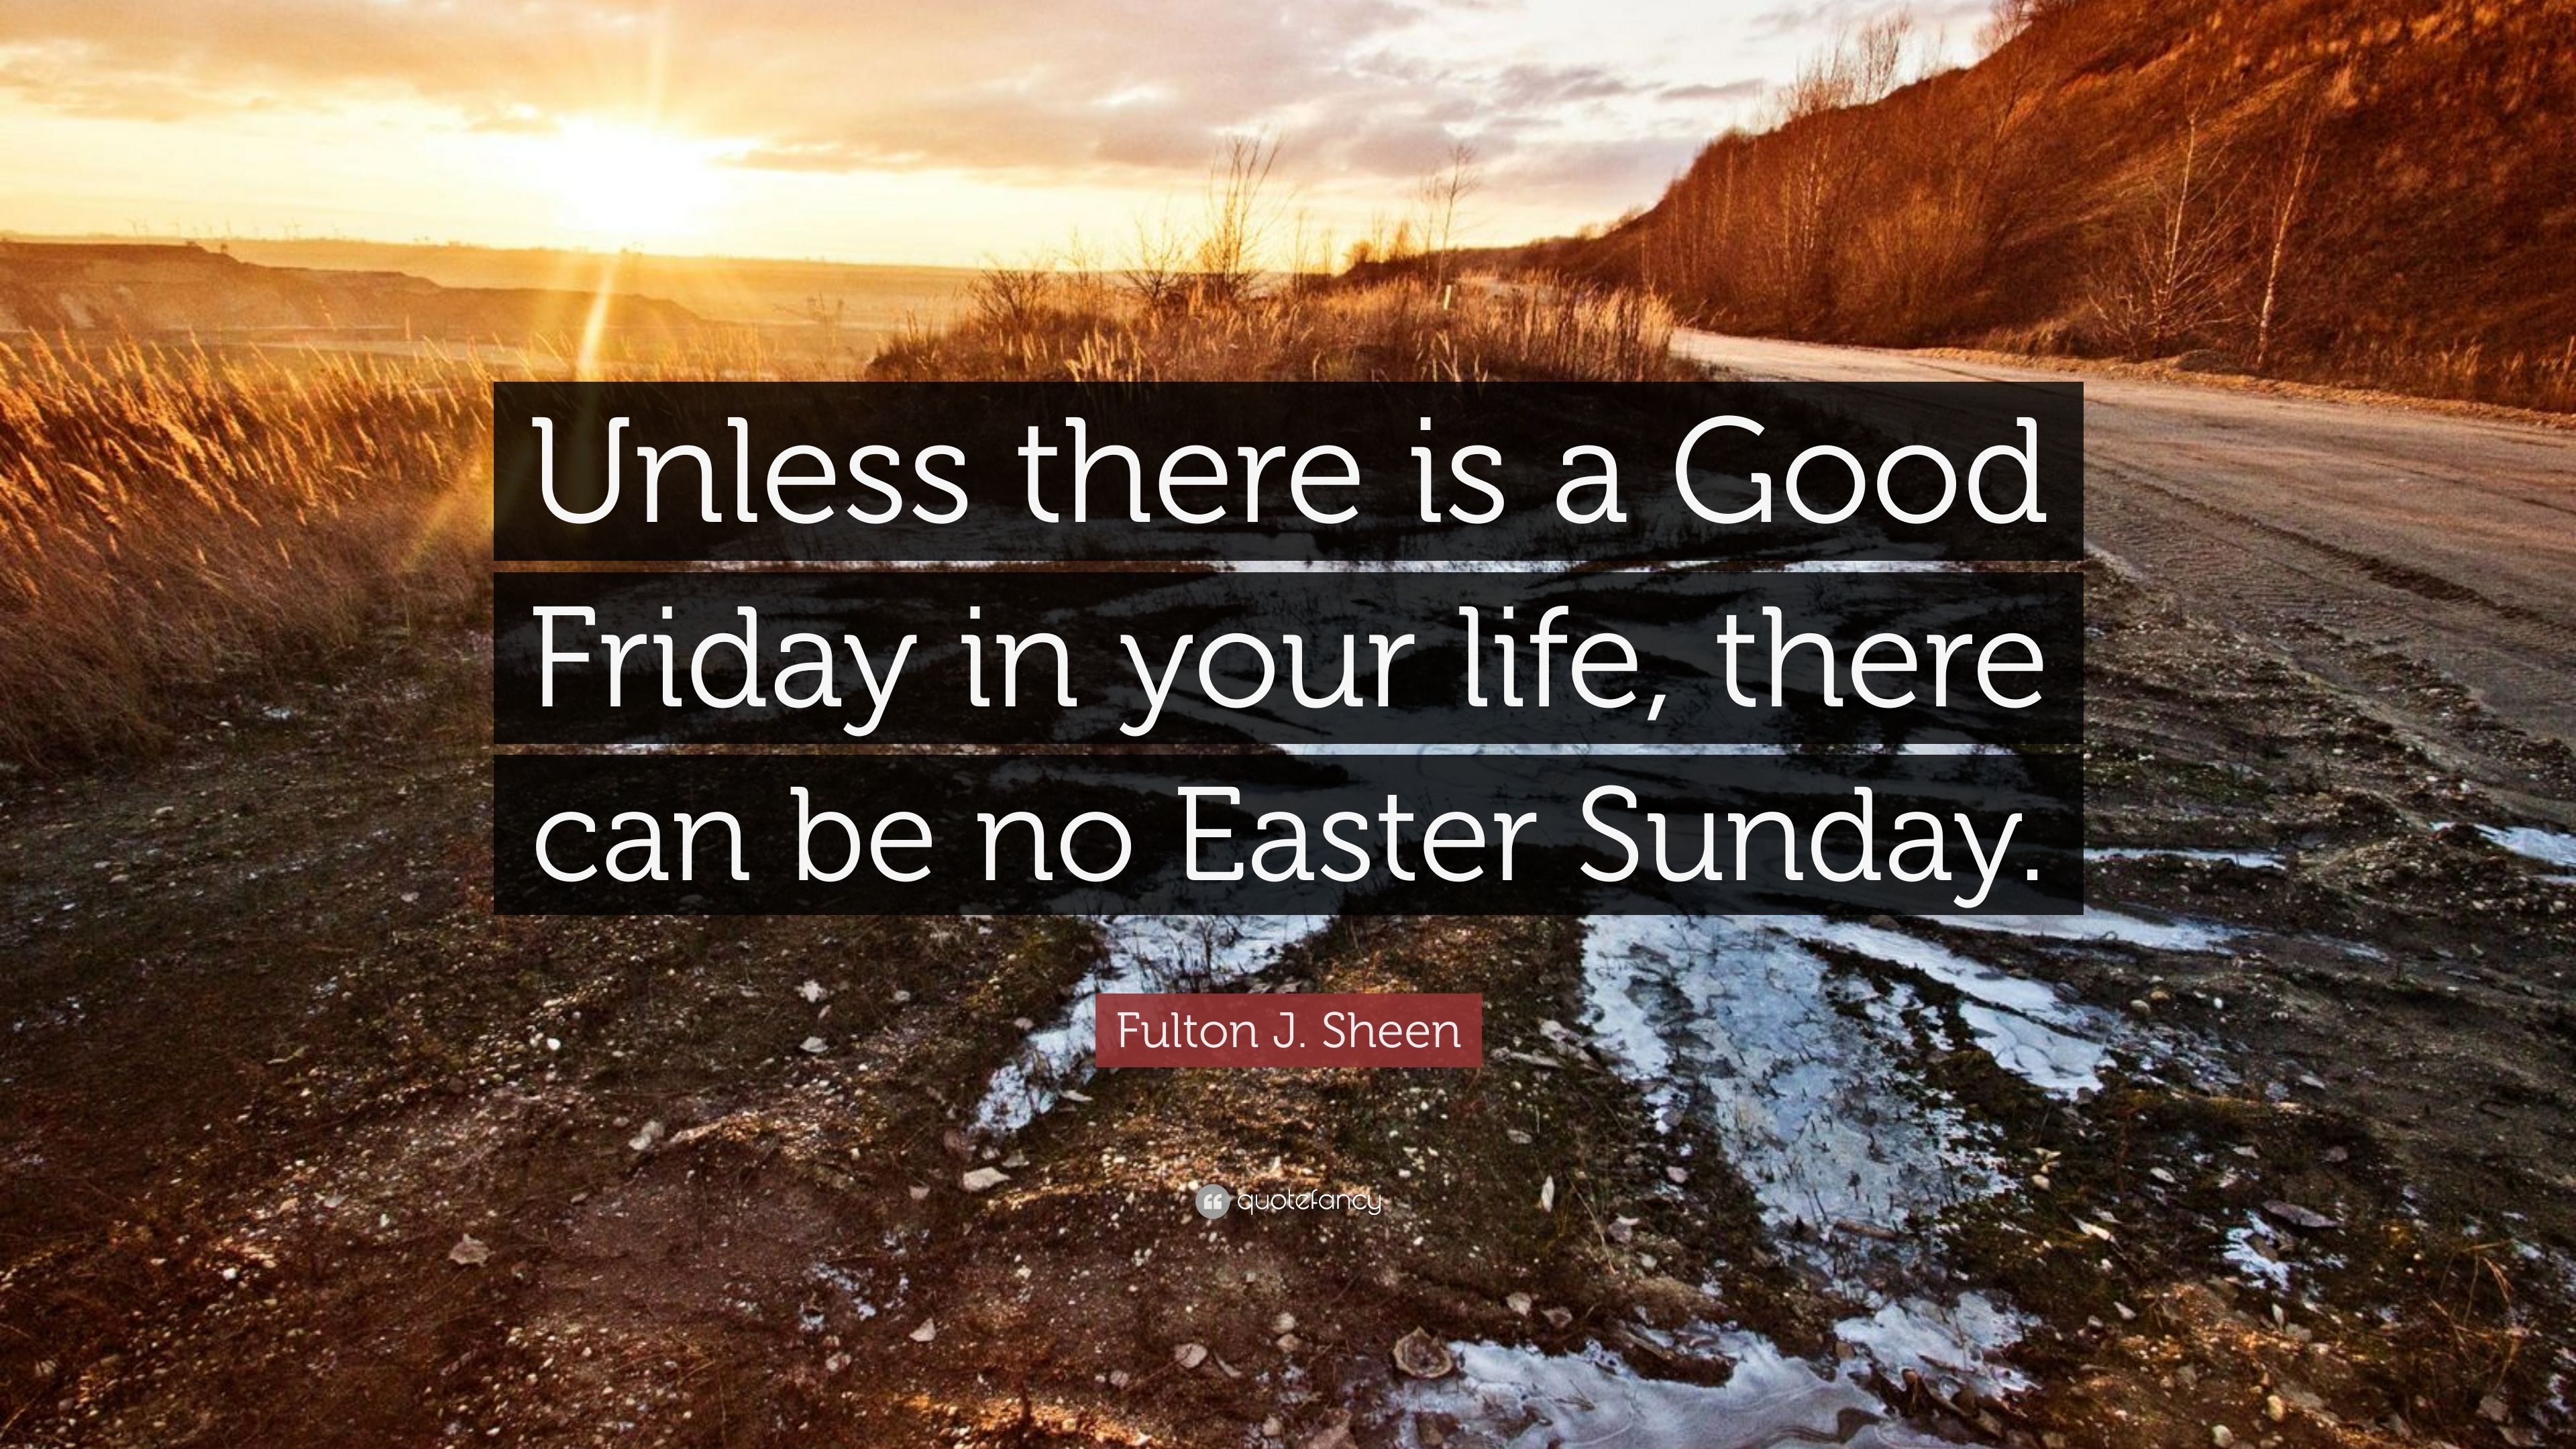 Fulton J. Sheen Quote: “Unless there is a Good Friday in your life